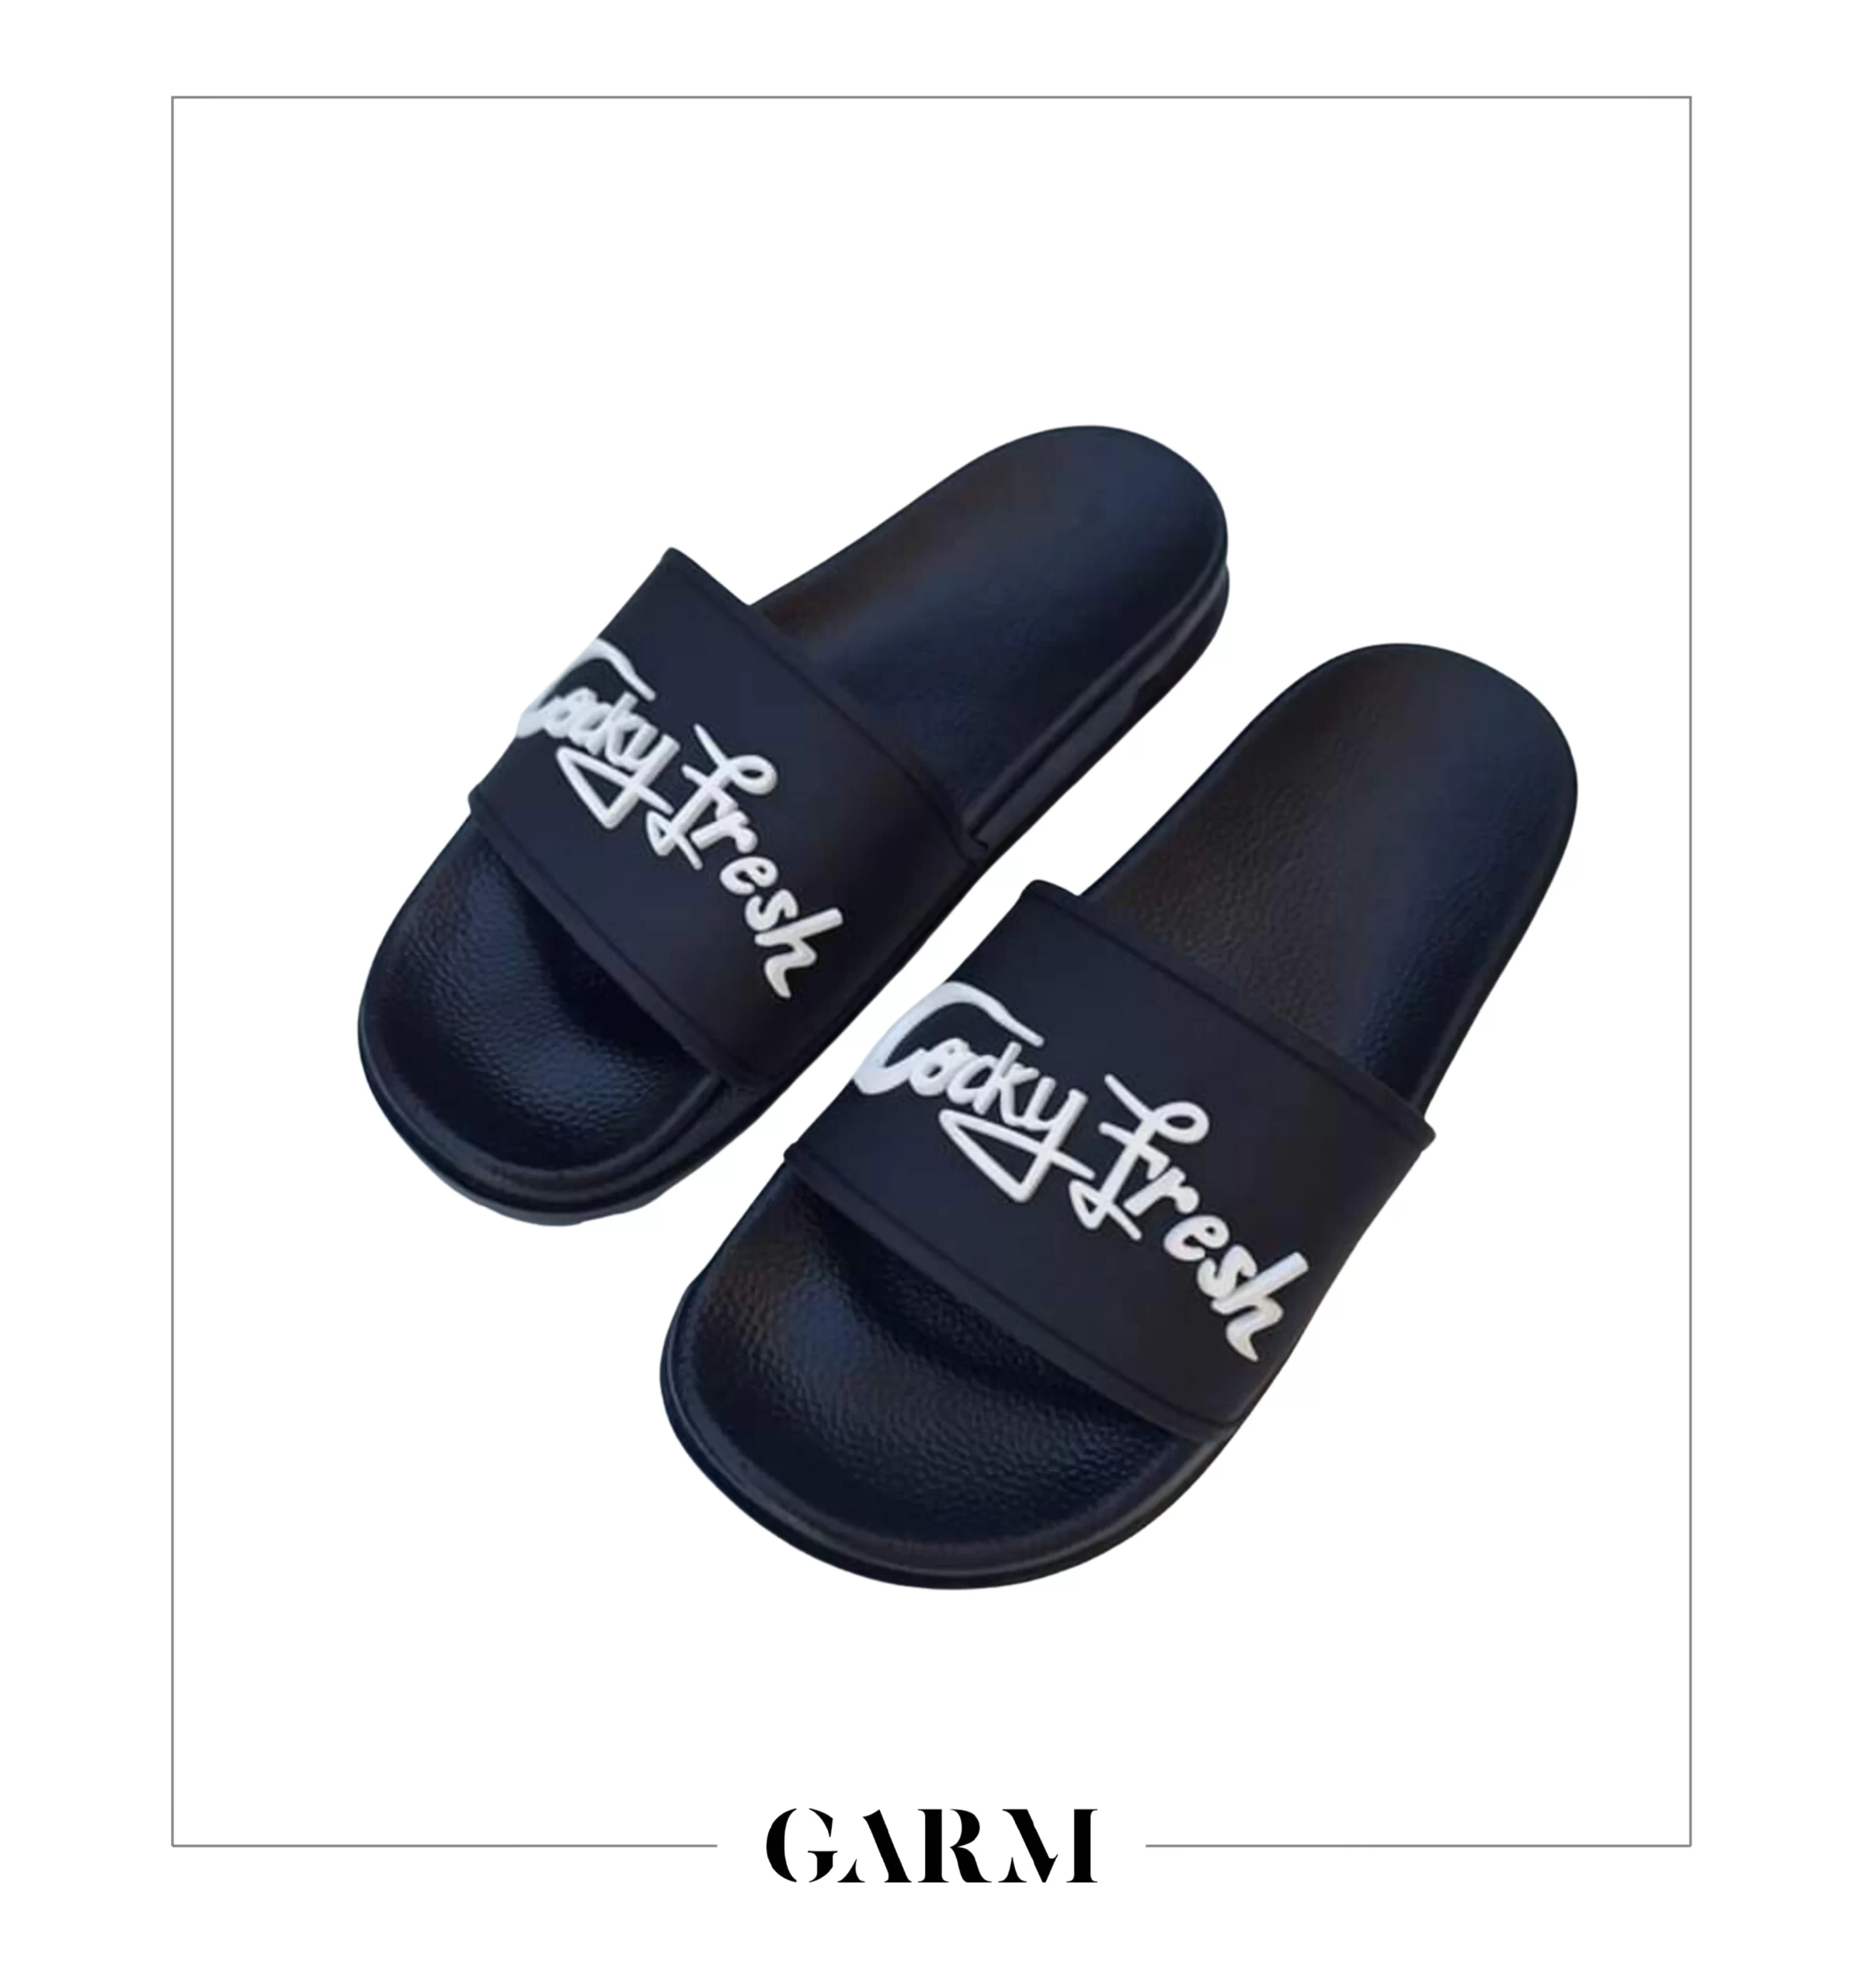 Air Slides by Cocky Fresh available on Garm